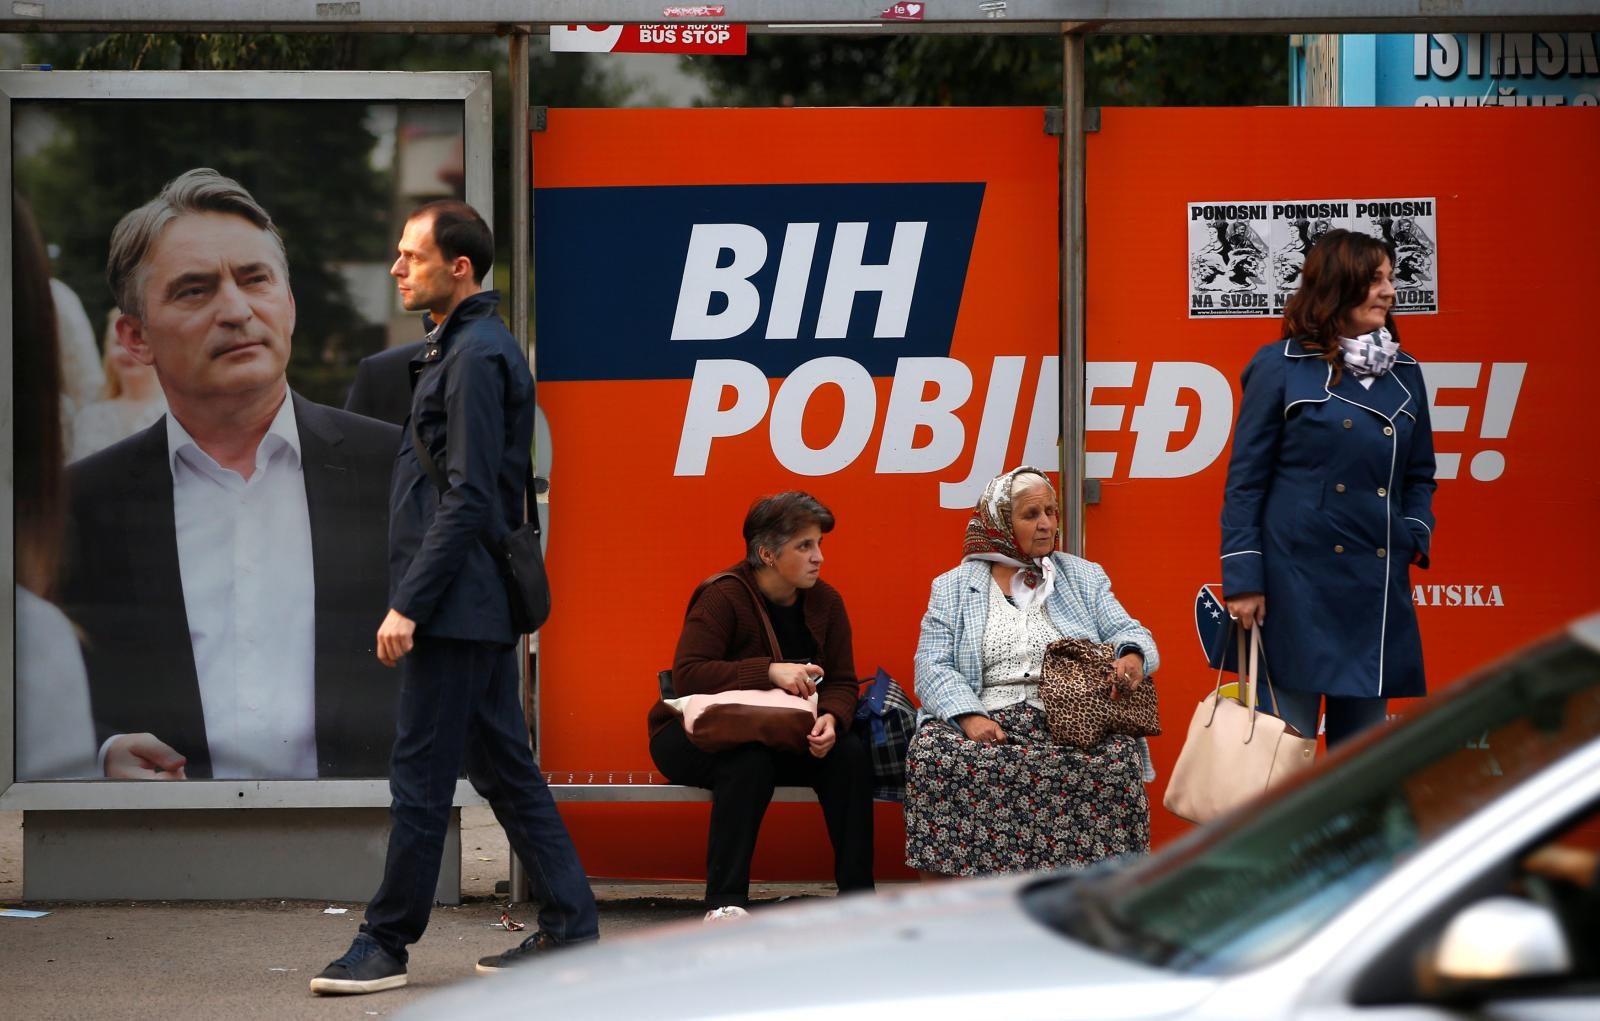 People wait for a bus next to Zeljko Komsic pre-election poster in Sarajevo People wait for a bus next to a Zeljko Komsic pre-election poster in Sarajevo, Bosnia and Herzegovina October 5, 2018. REUTERS/Dado Ruvic DADO RUVIC